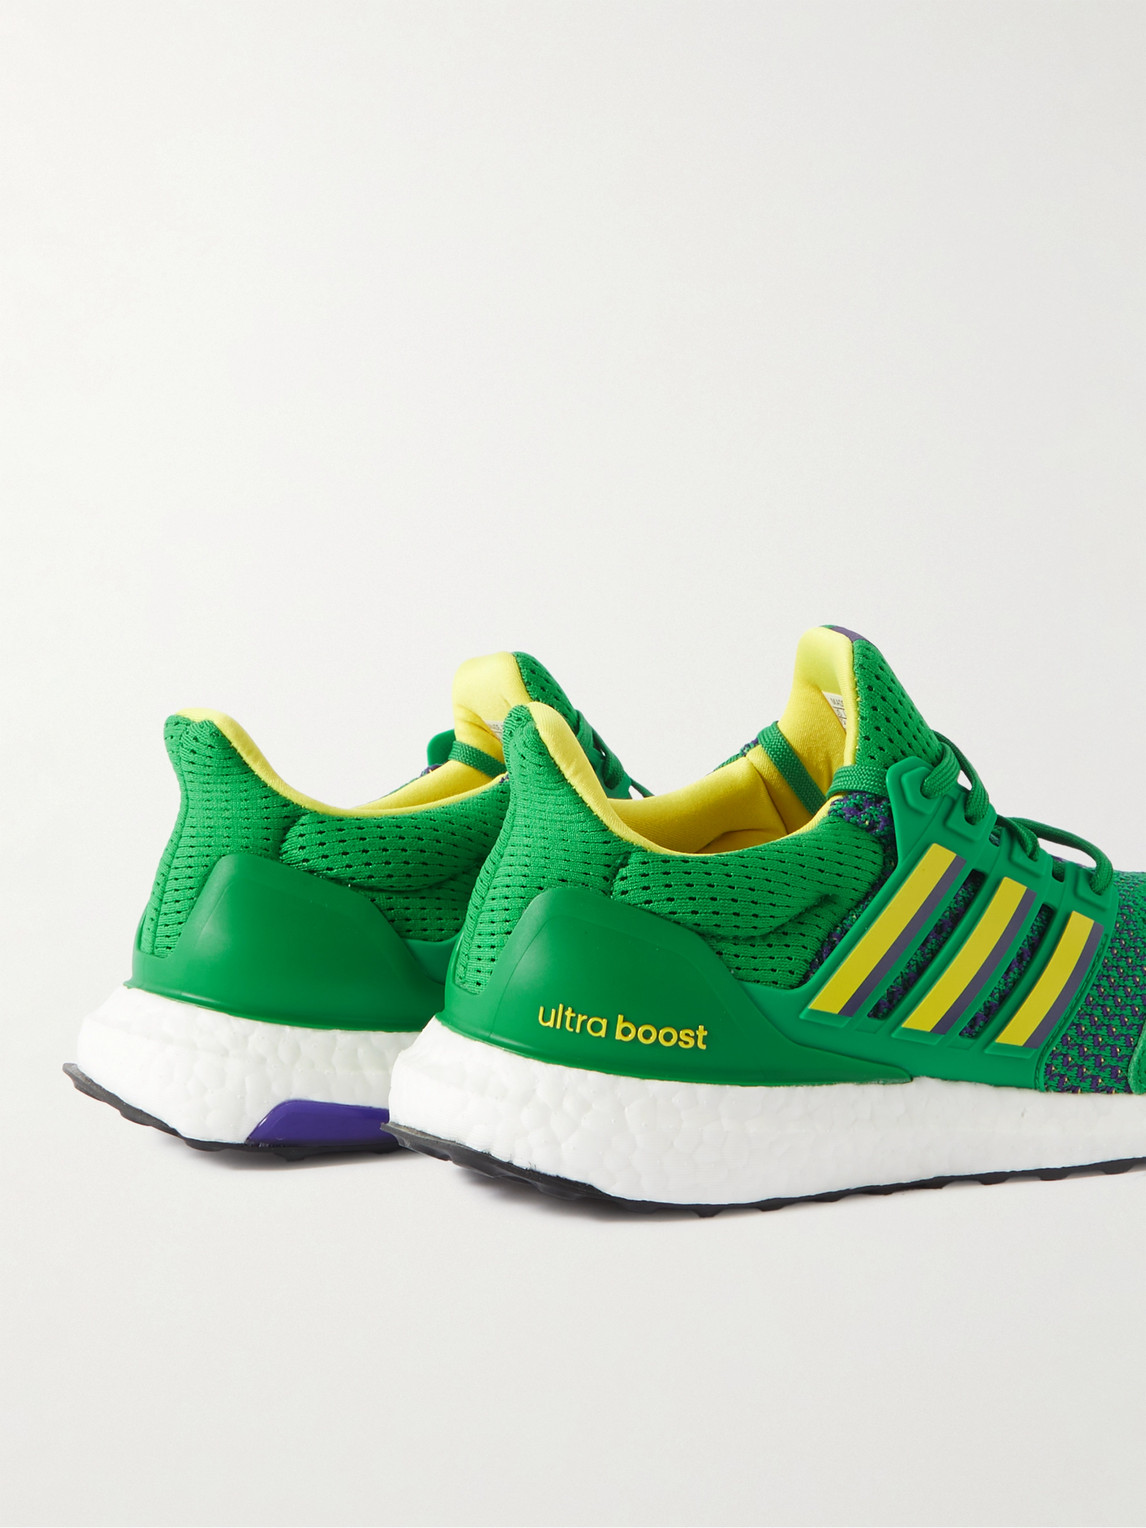 ADIDAS ORIGINALS THE MIGHTY DUCKS ULTRABOOST 1.0 RUBBER-TRIMMED PRIMEKNIT RUNNING SNEAKERS 